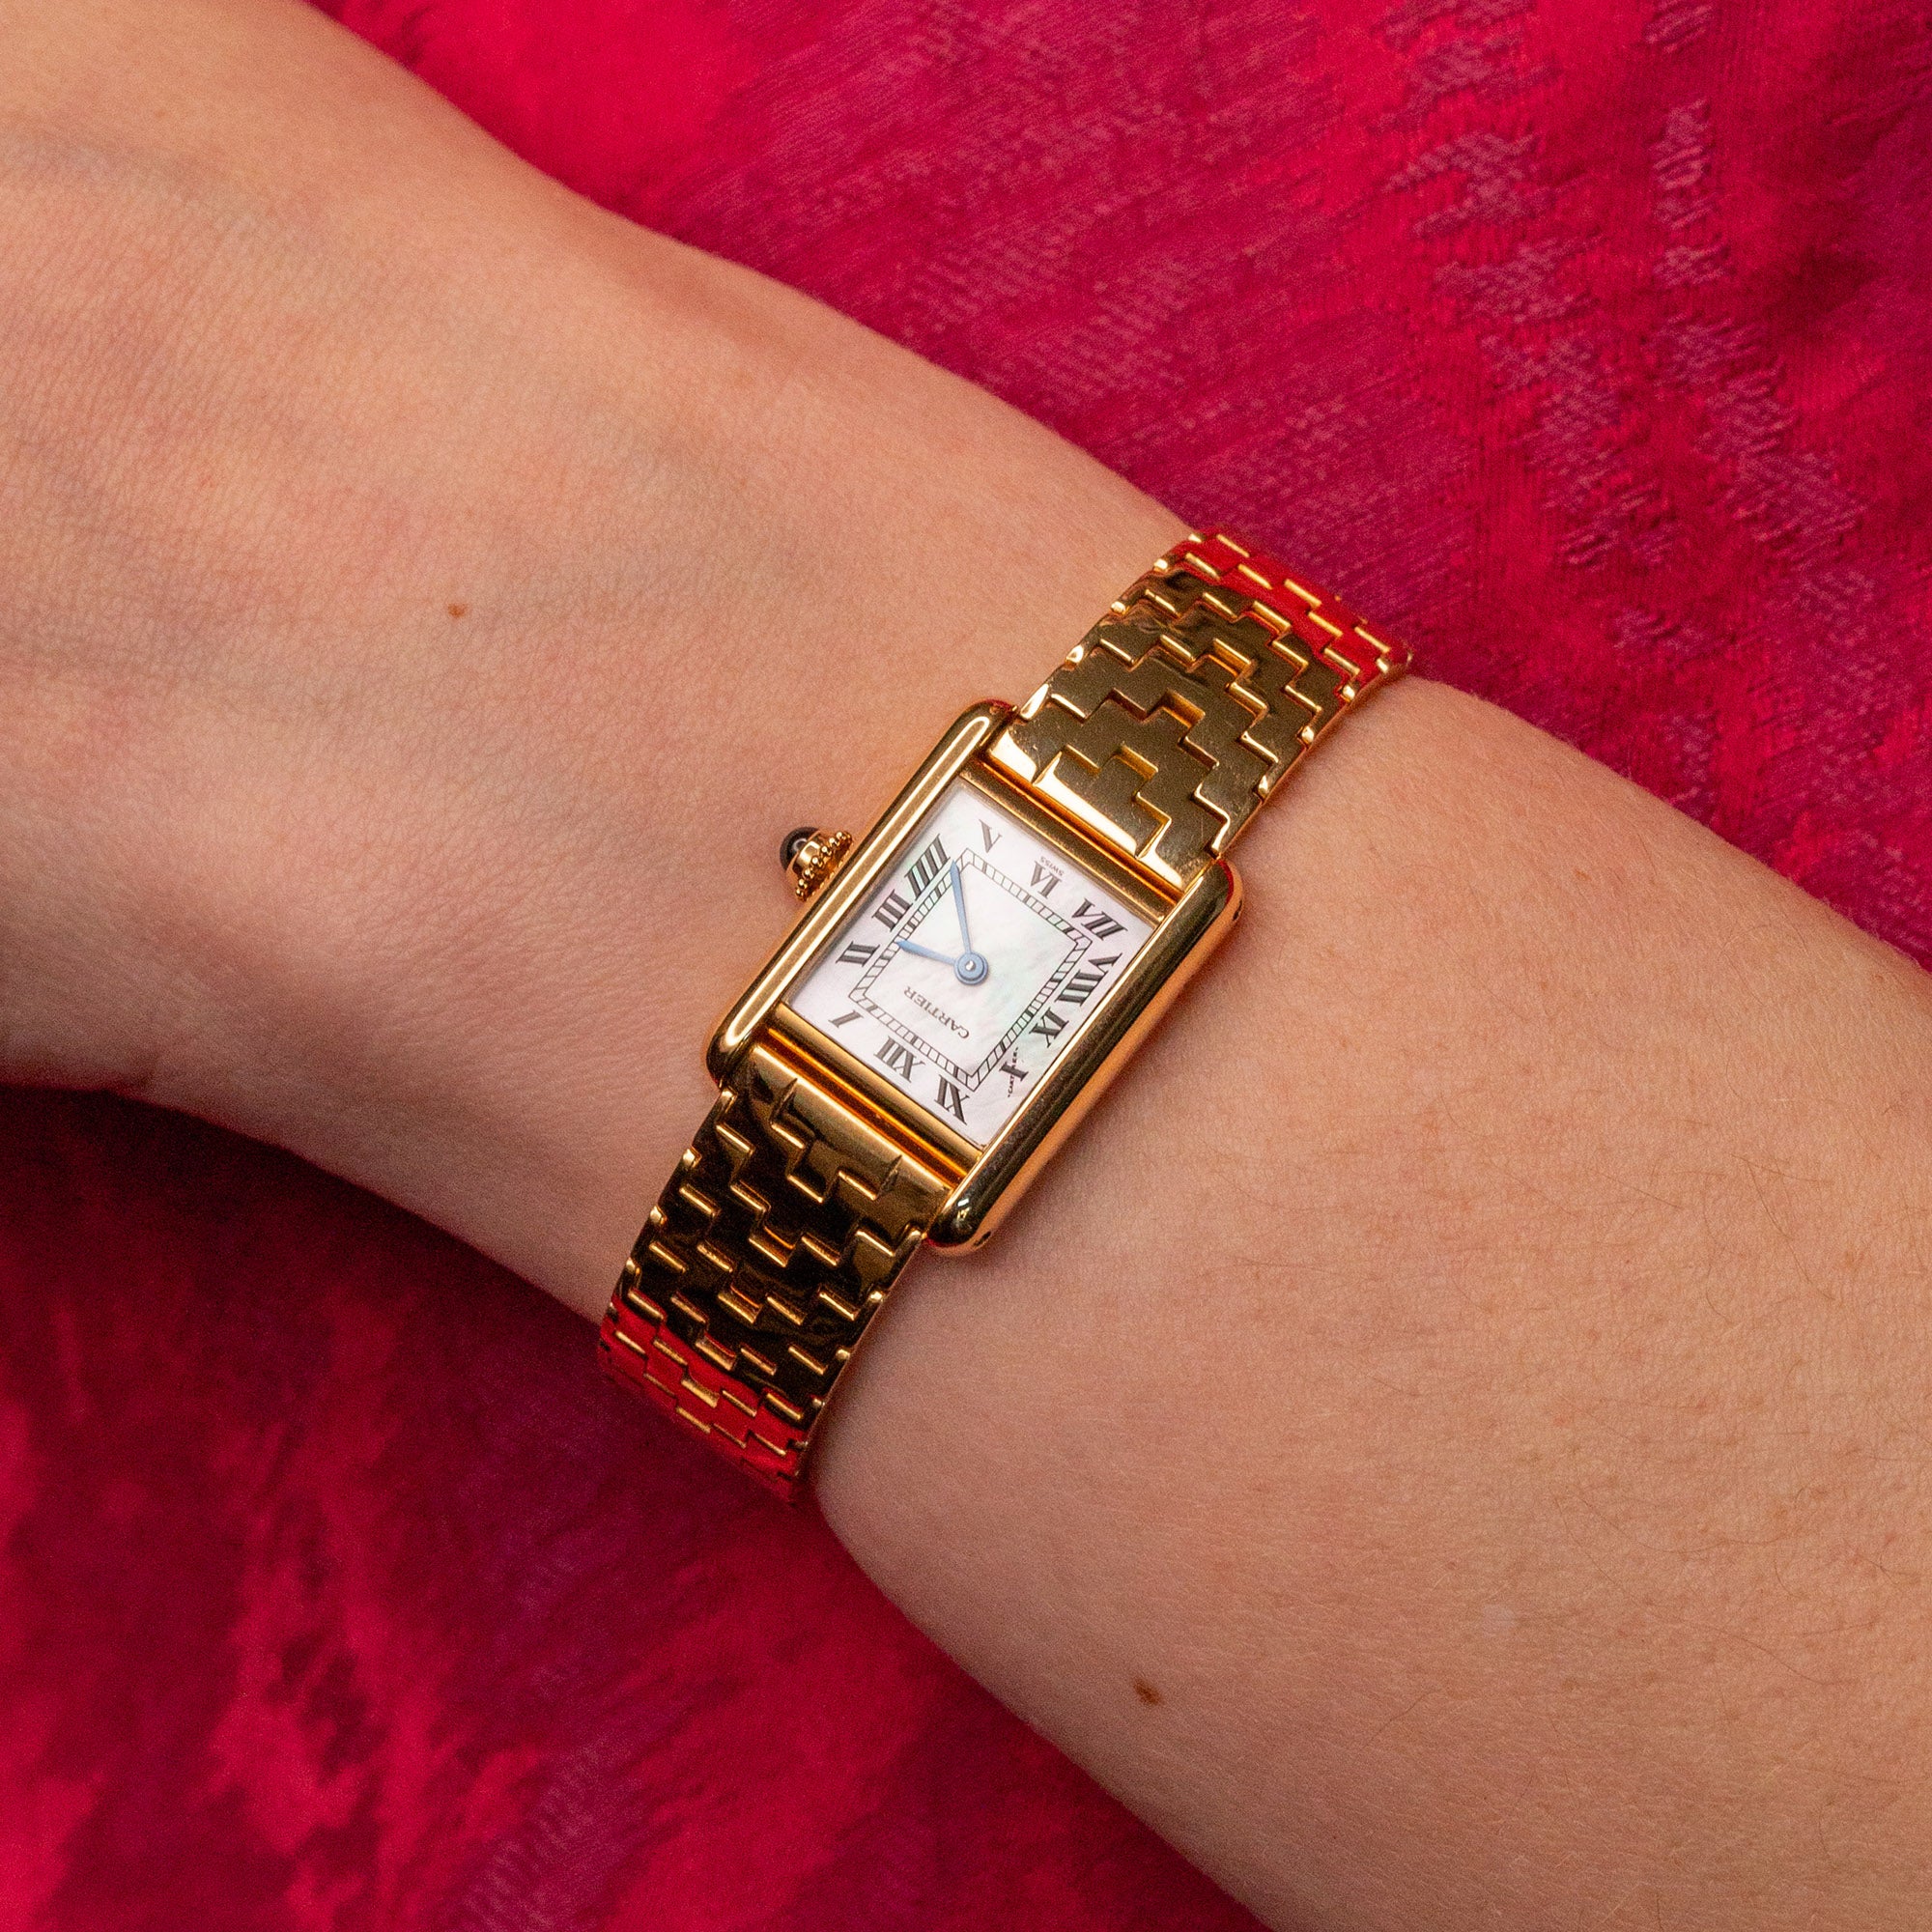 Cartier Tank w/Mother of Pearl Dial & Pyramid Bracelet - Very Rare/Near Mint - PENDING